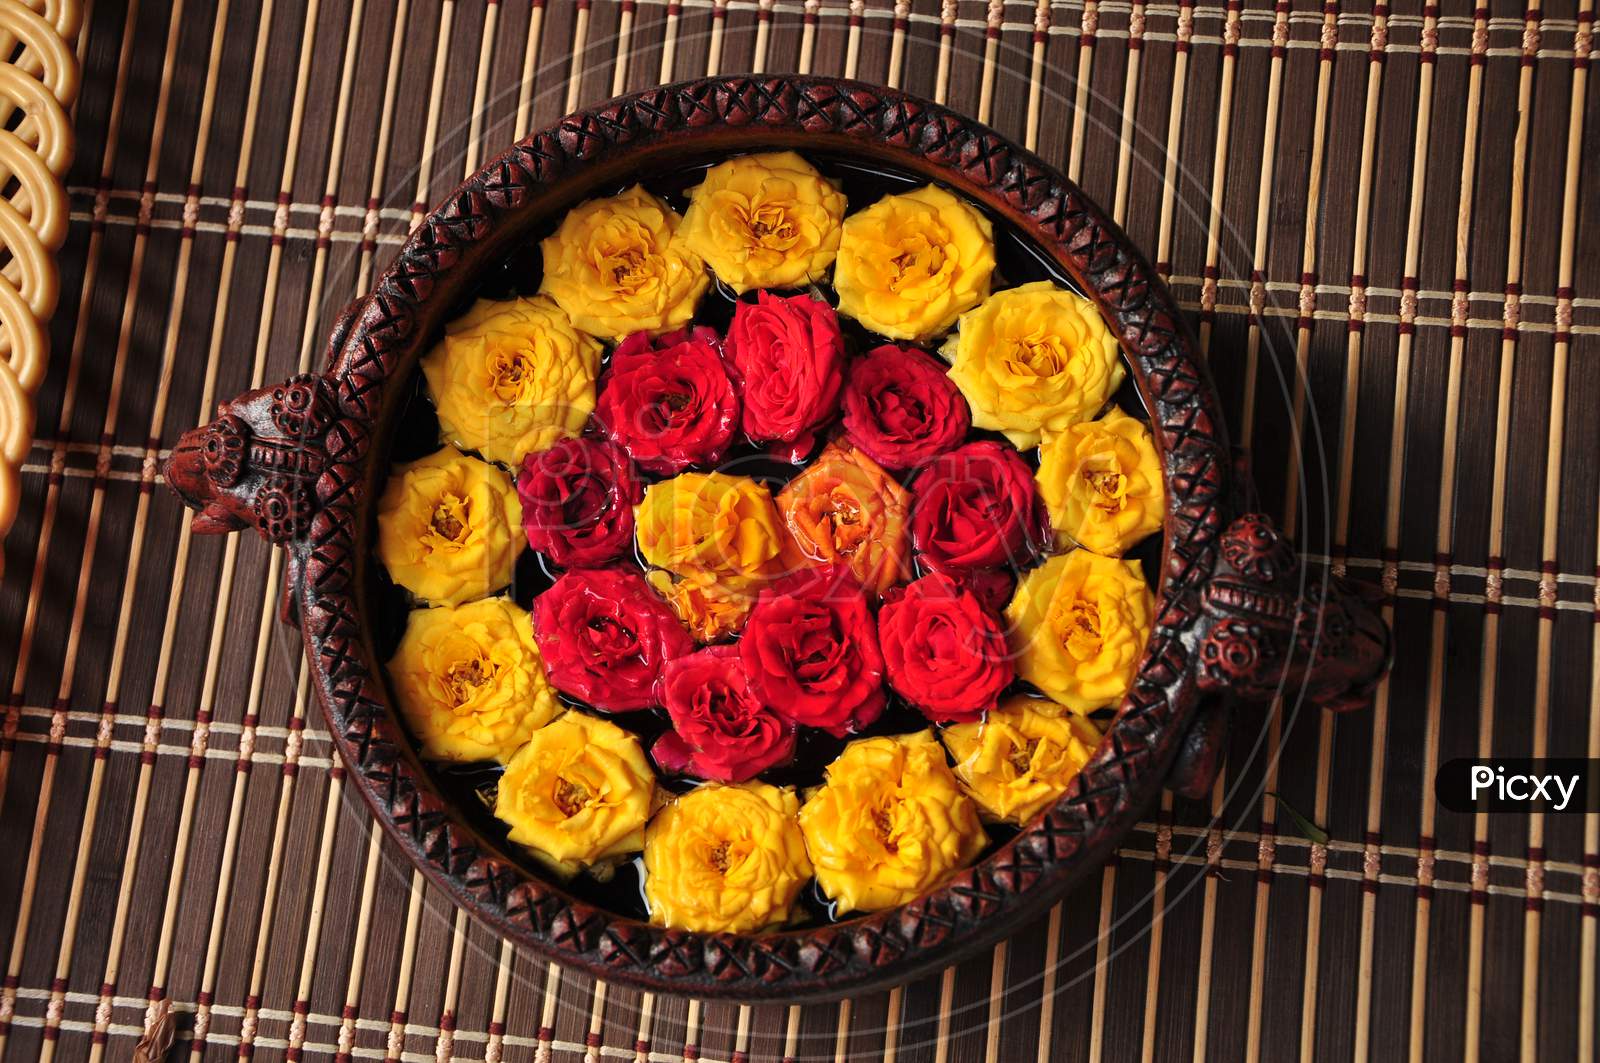 Rose Placed In A Water Bowl.